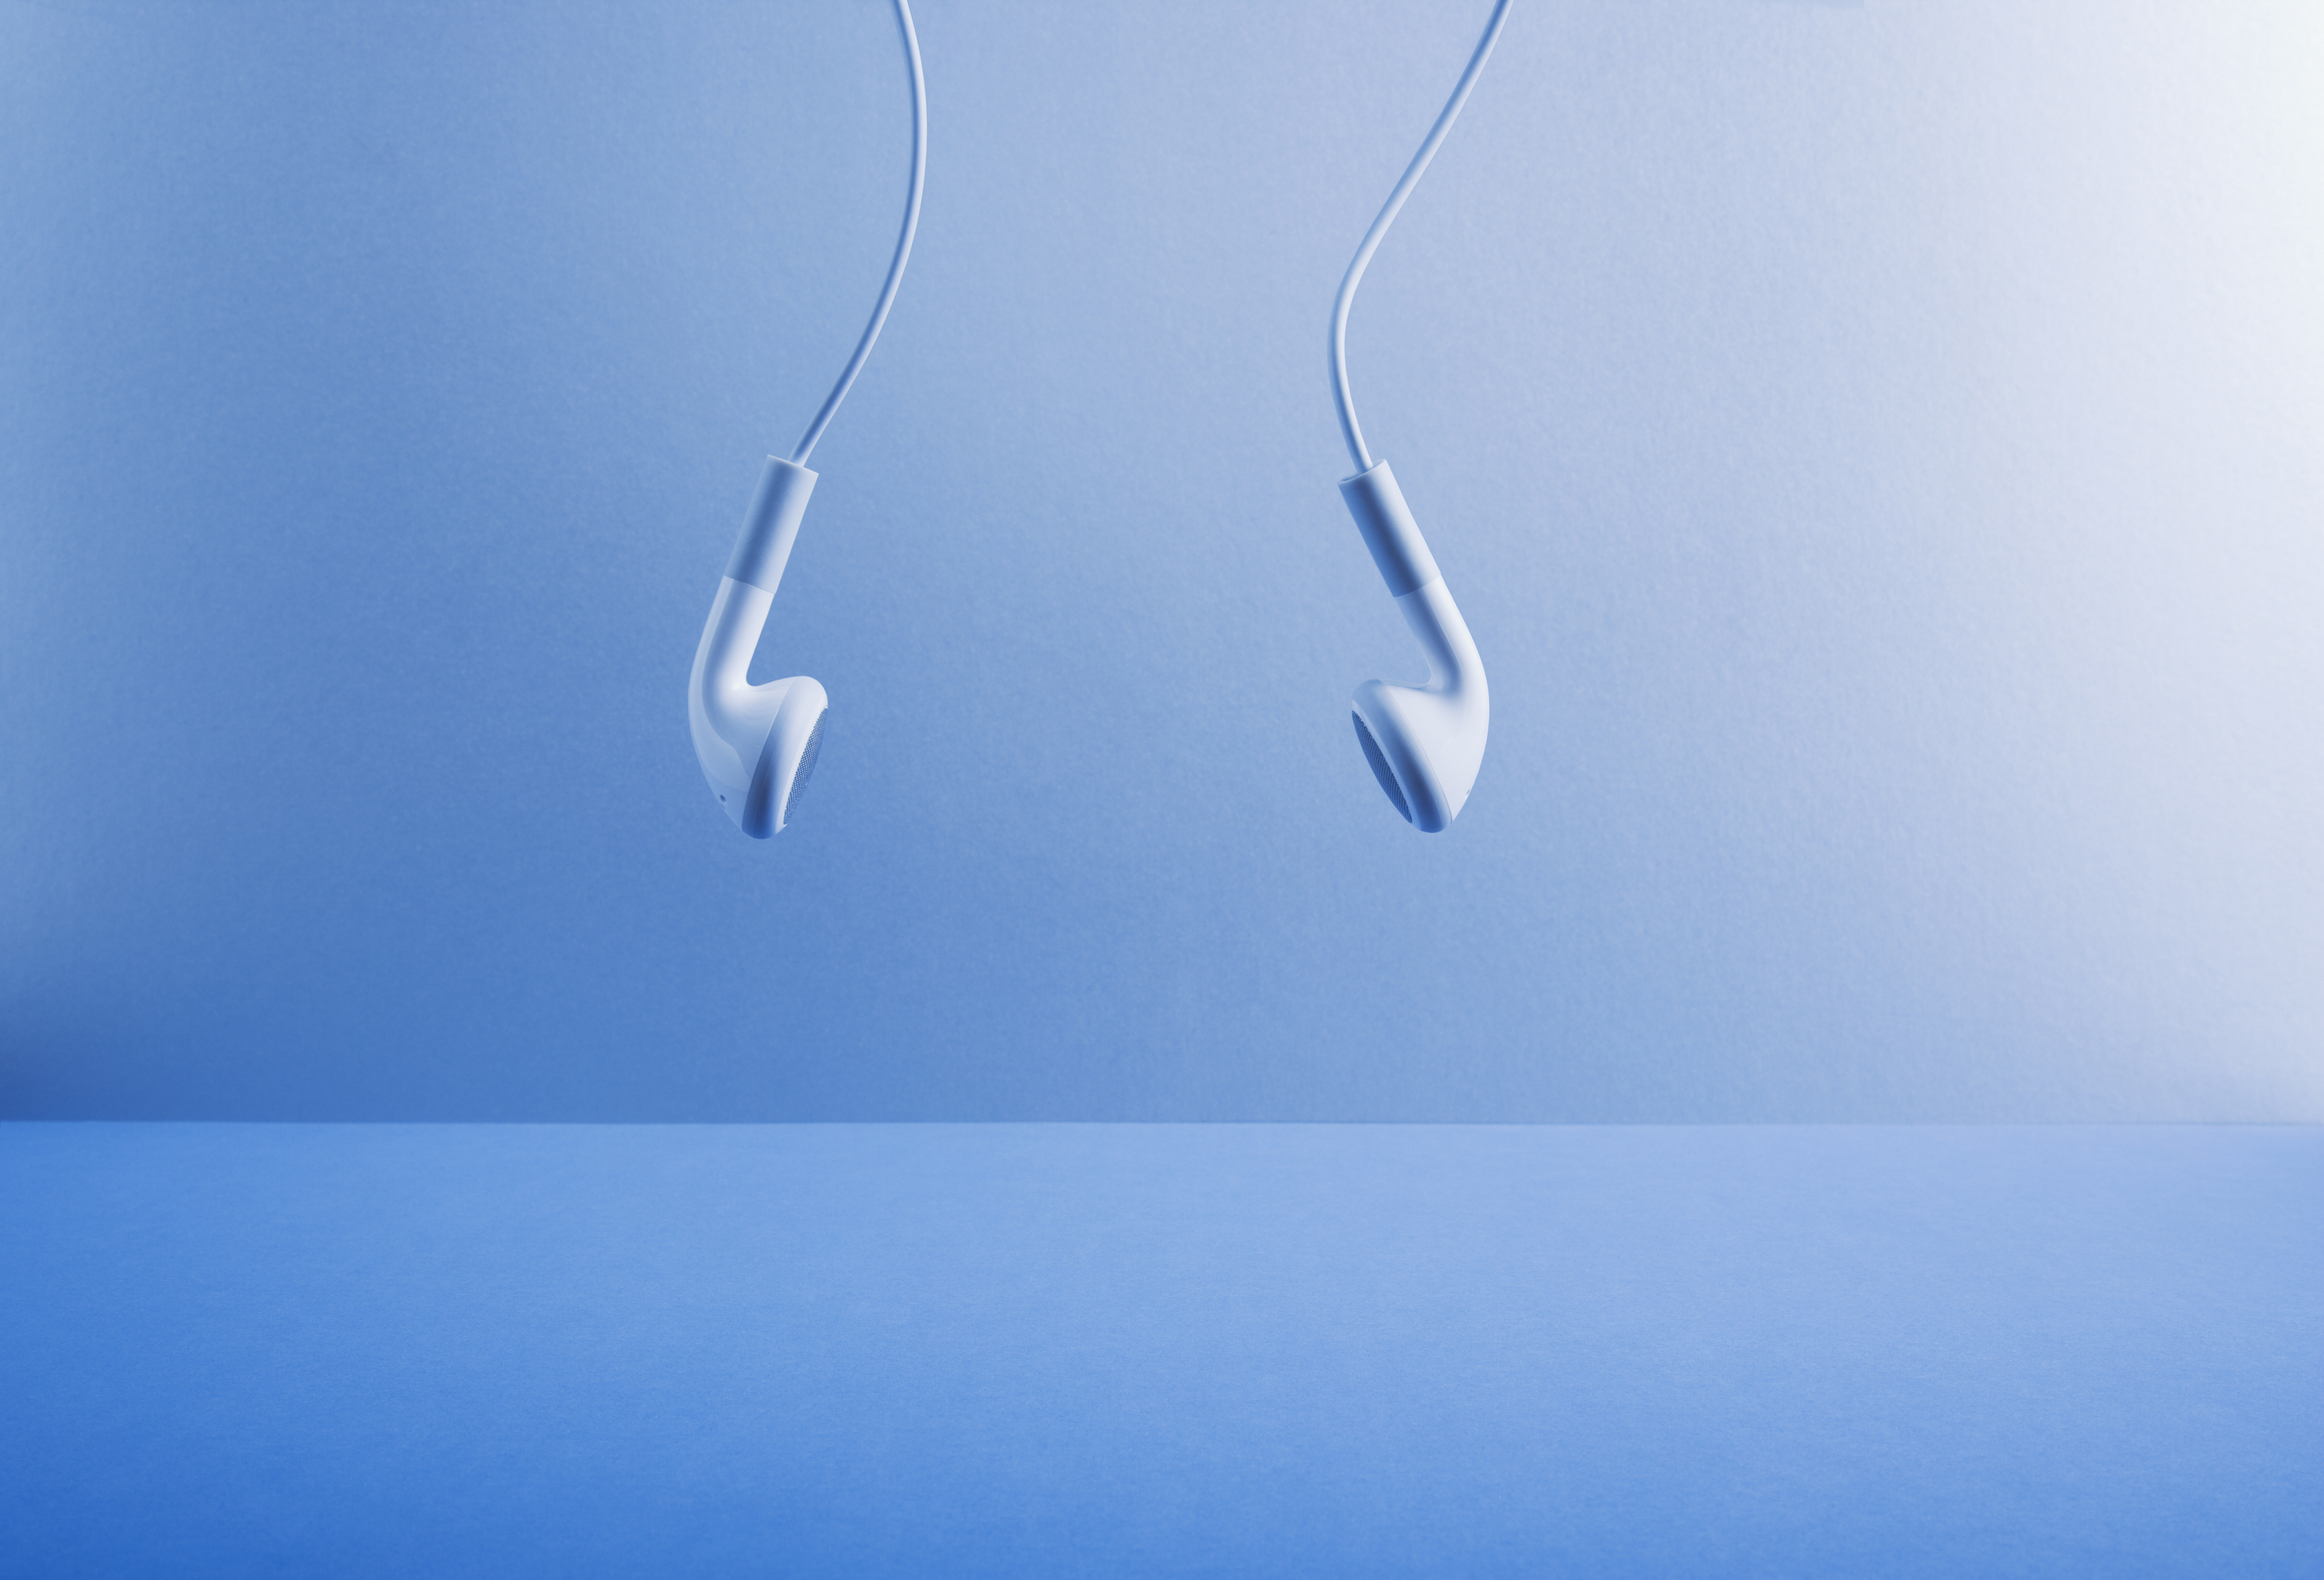 Image Of White Headphones Hanging On A Blue Background.